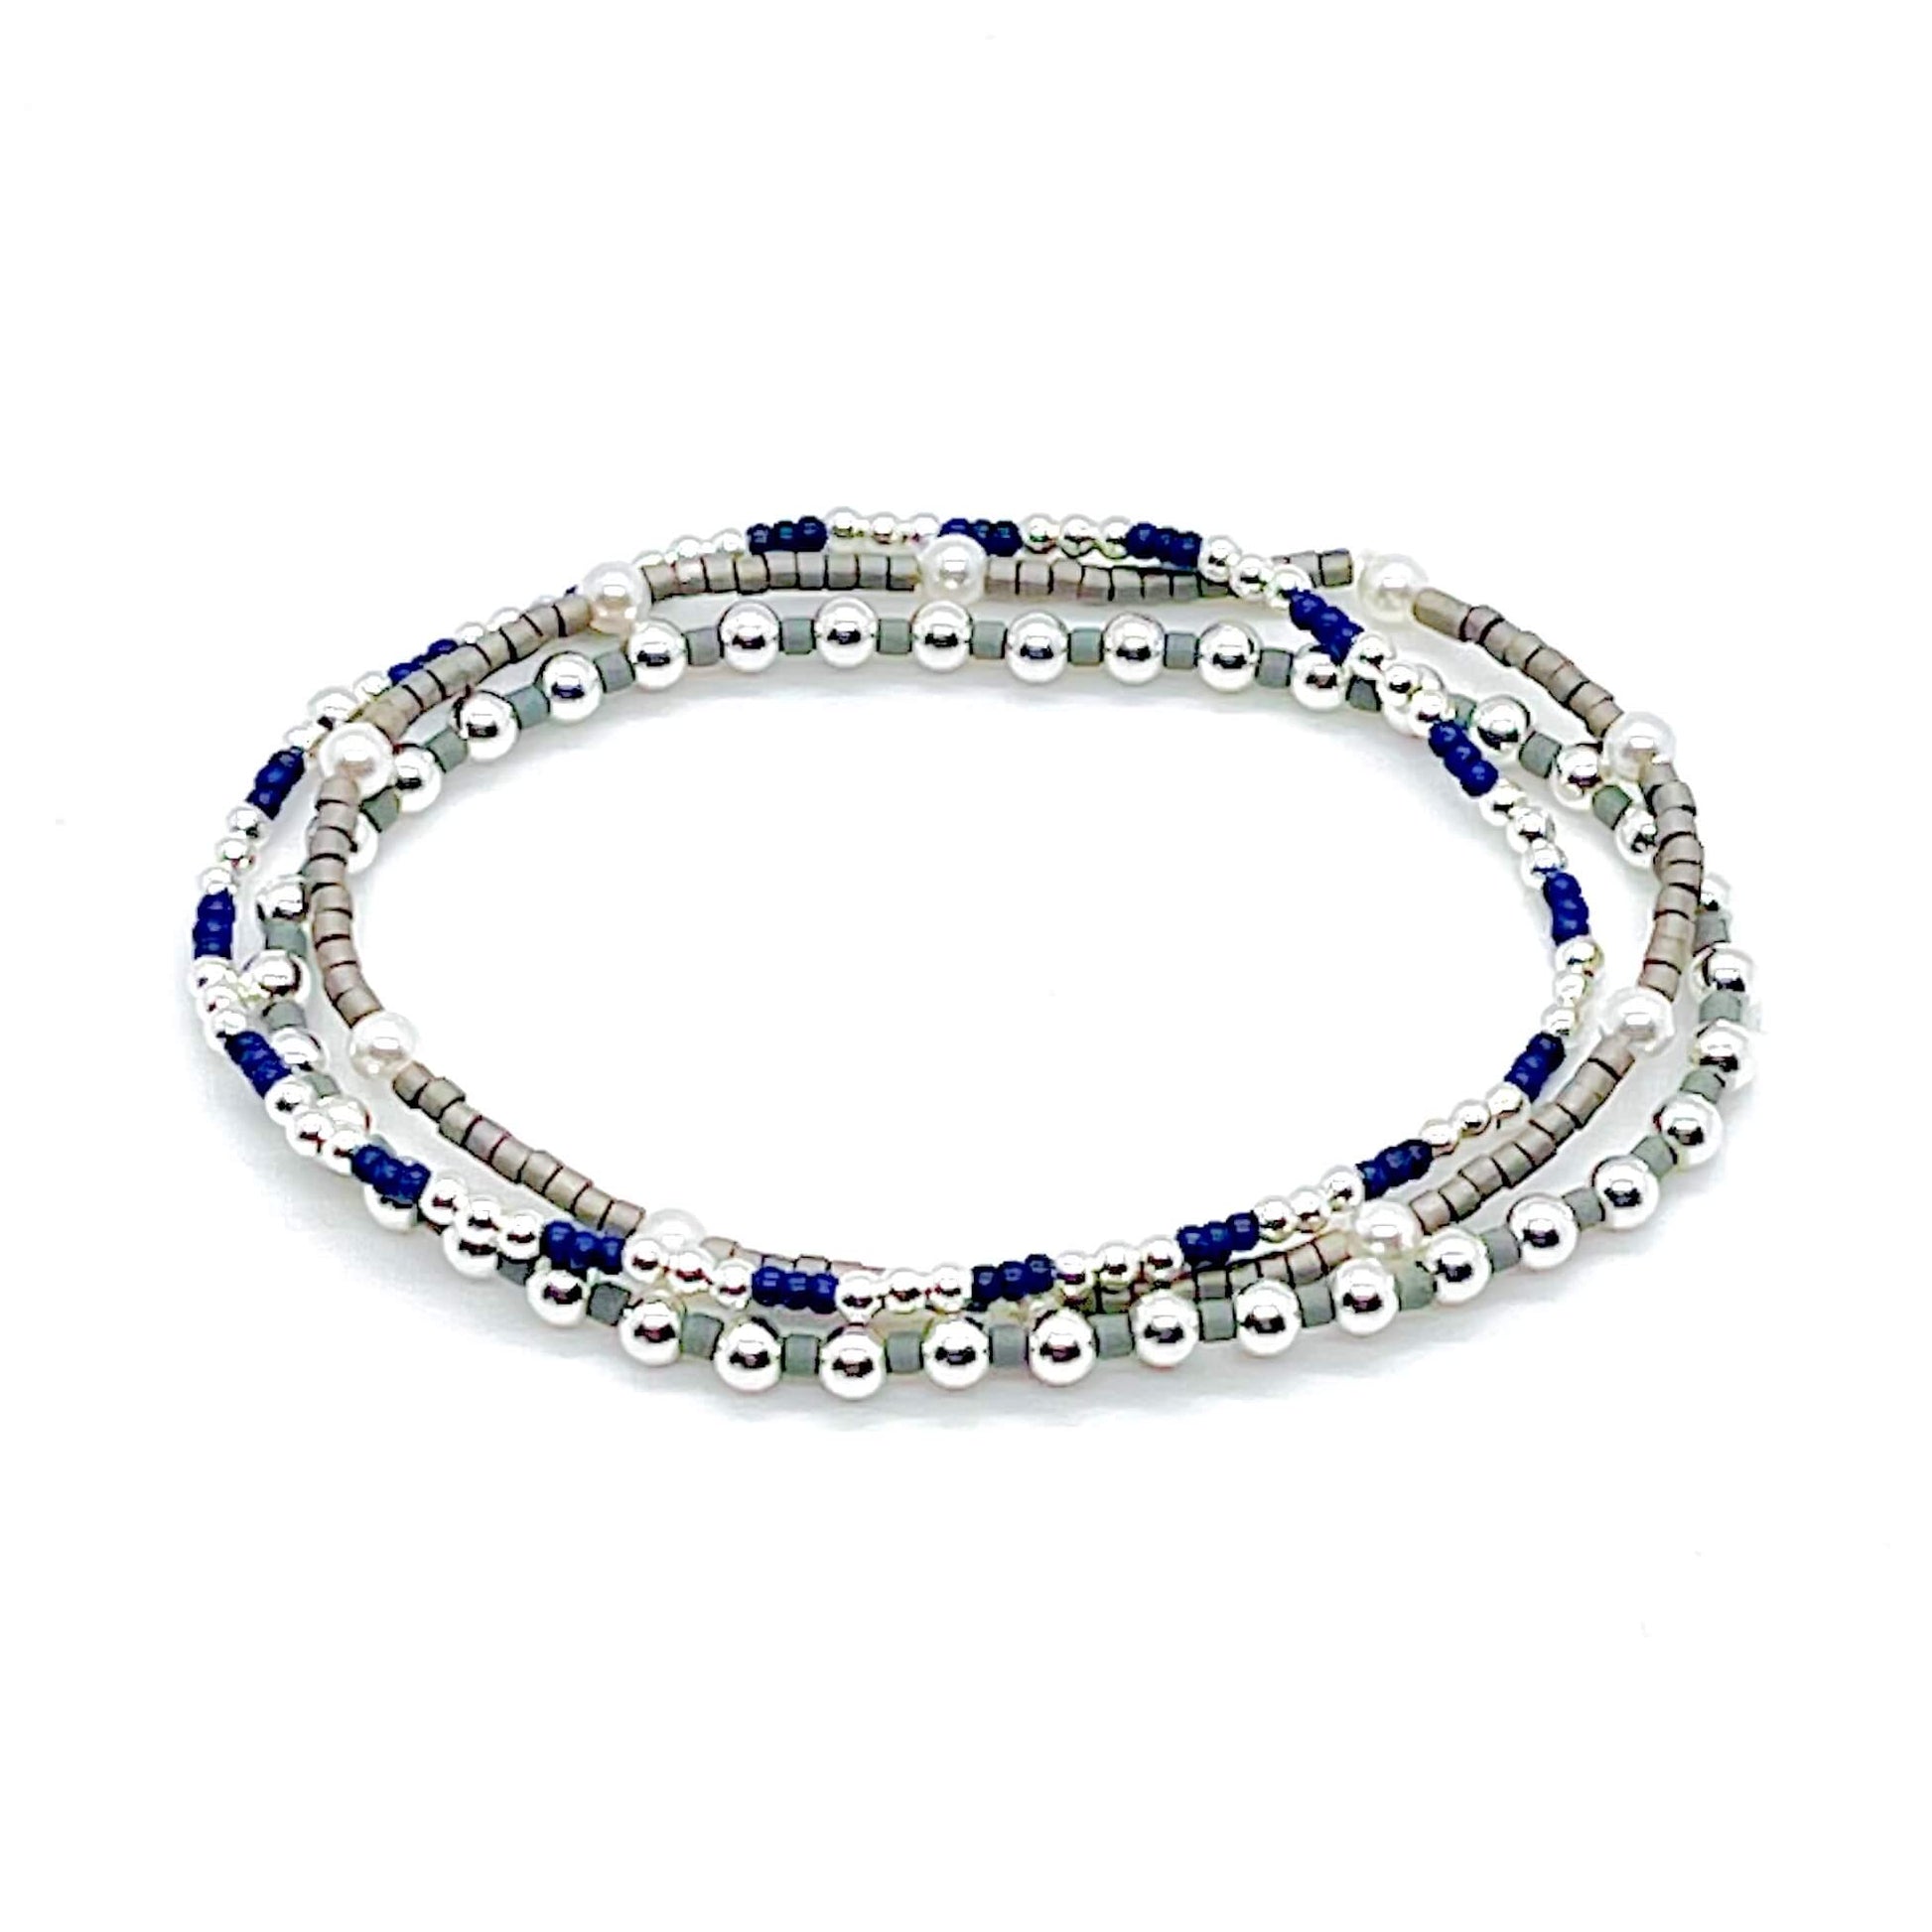 Silver bracelet stack with pearls, grey and blue seed beads, and silver ball beads on stretch cord.